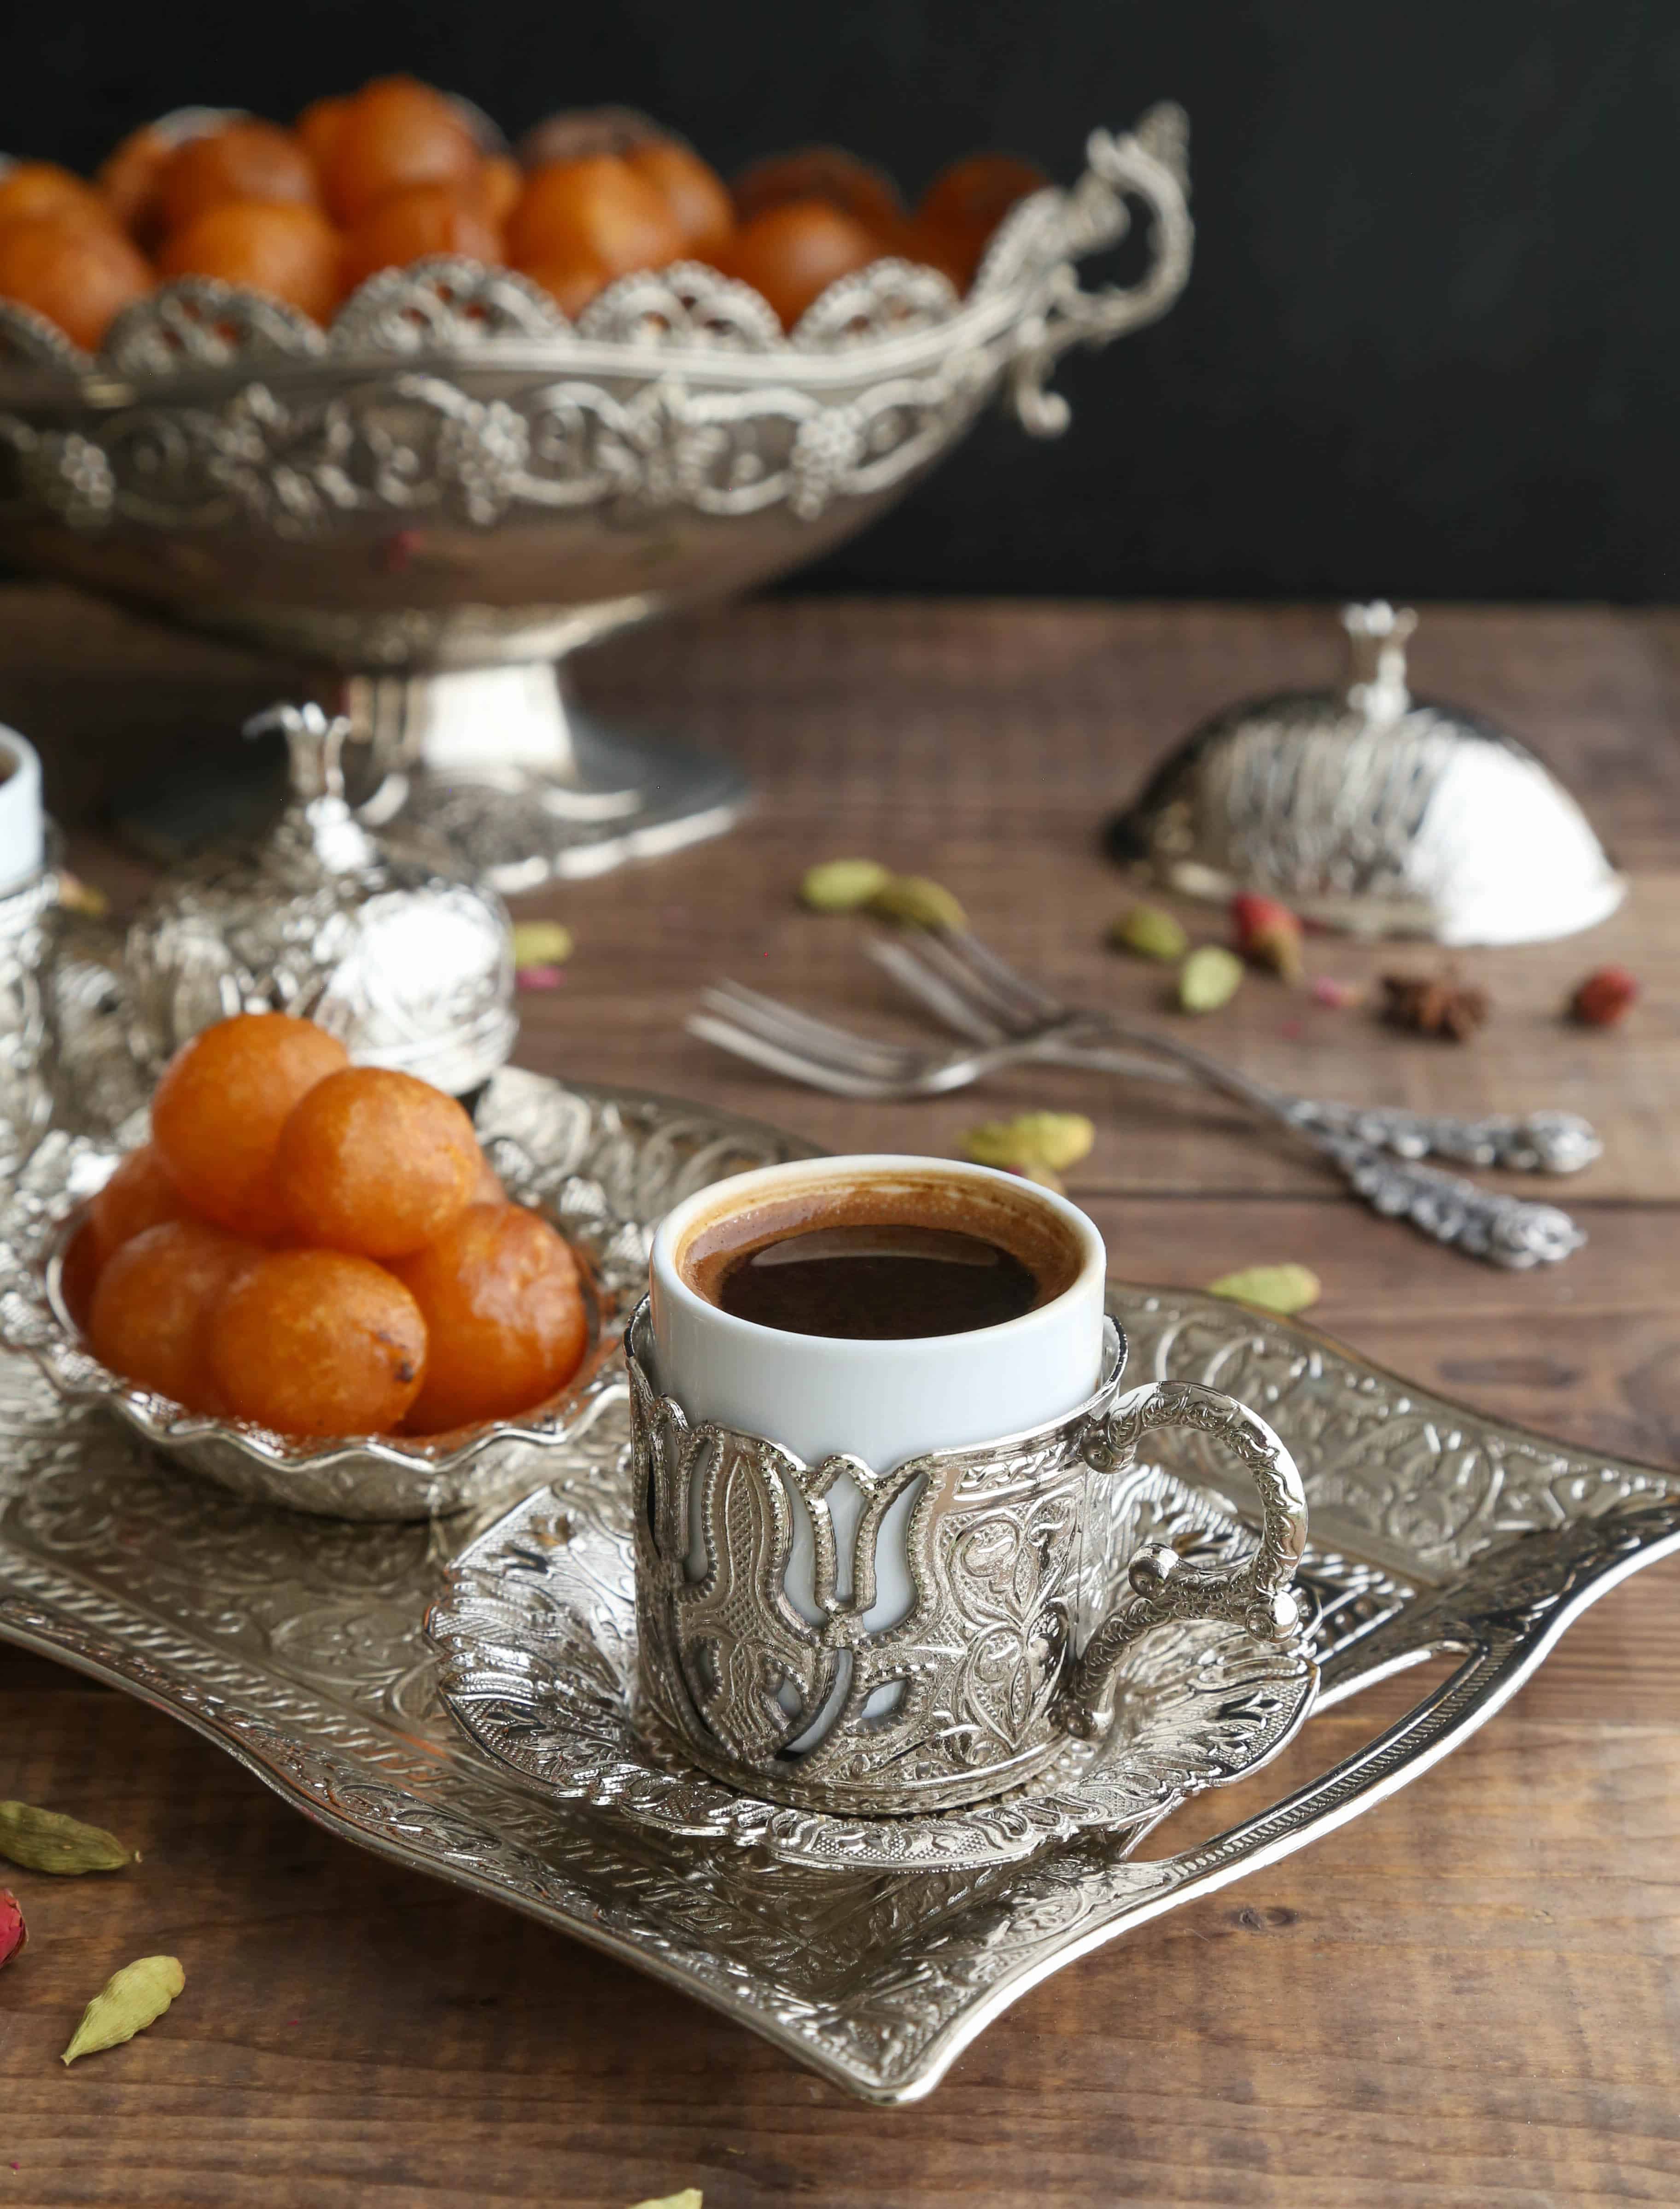 Simple and delicious sweet balls that are popular in the levant countries